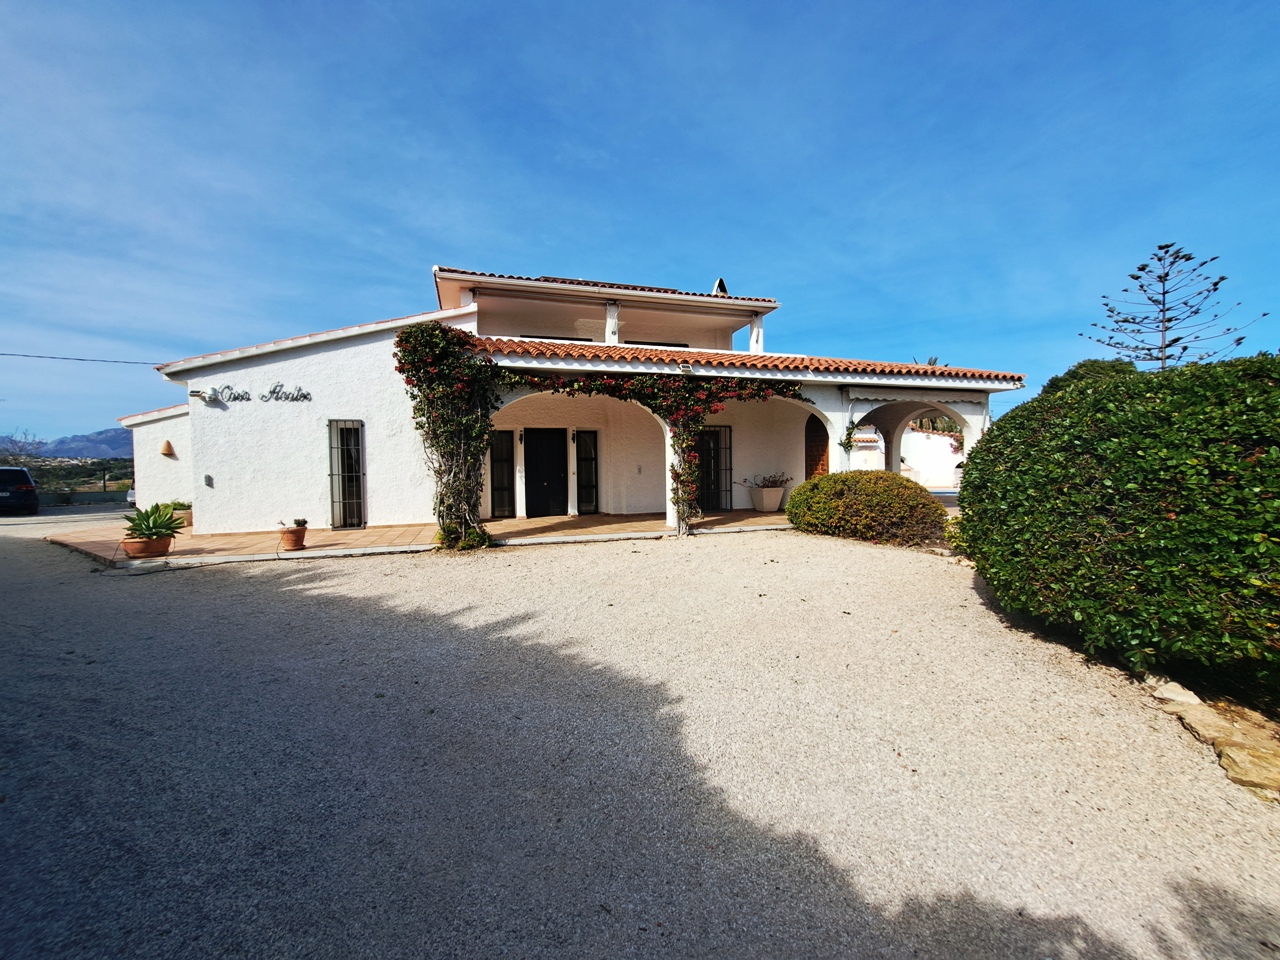 Fantastic well maintained villa